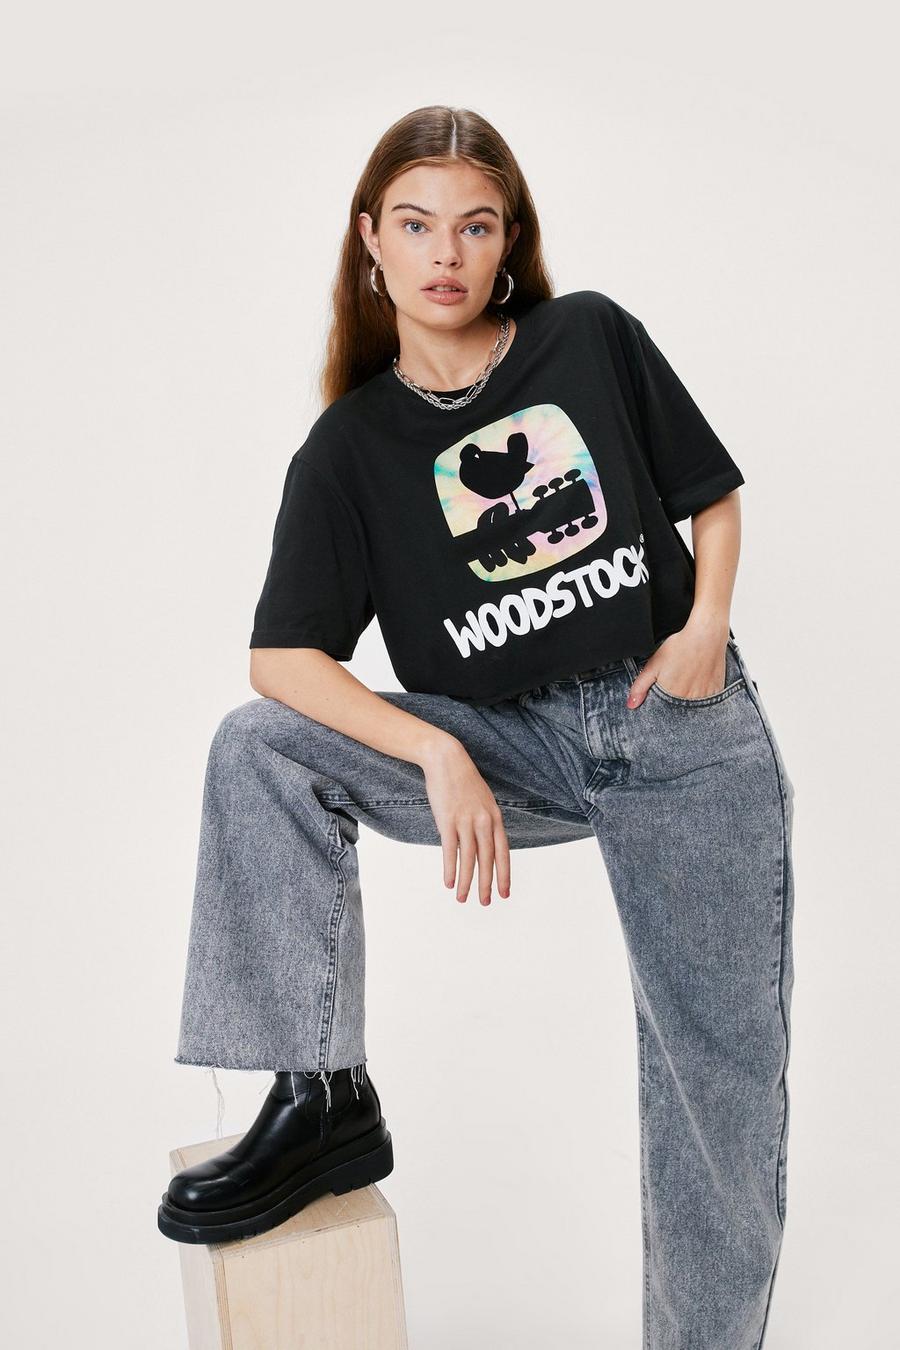 Woodstock Cropped Graphic T-Shirt